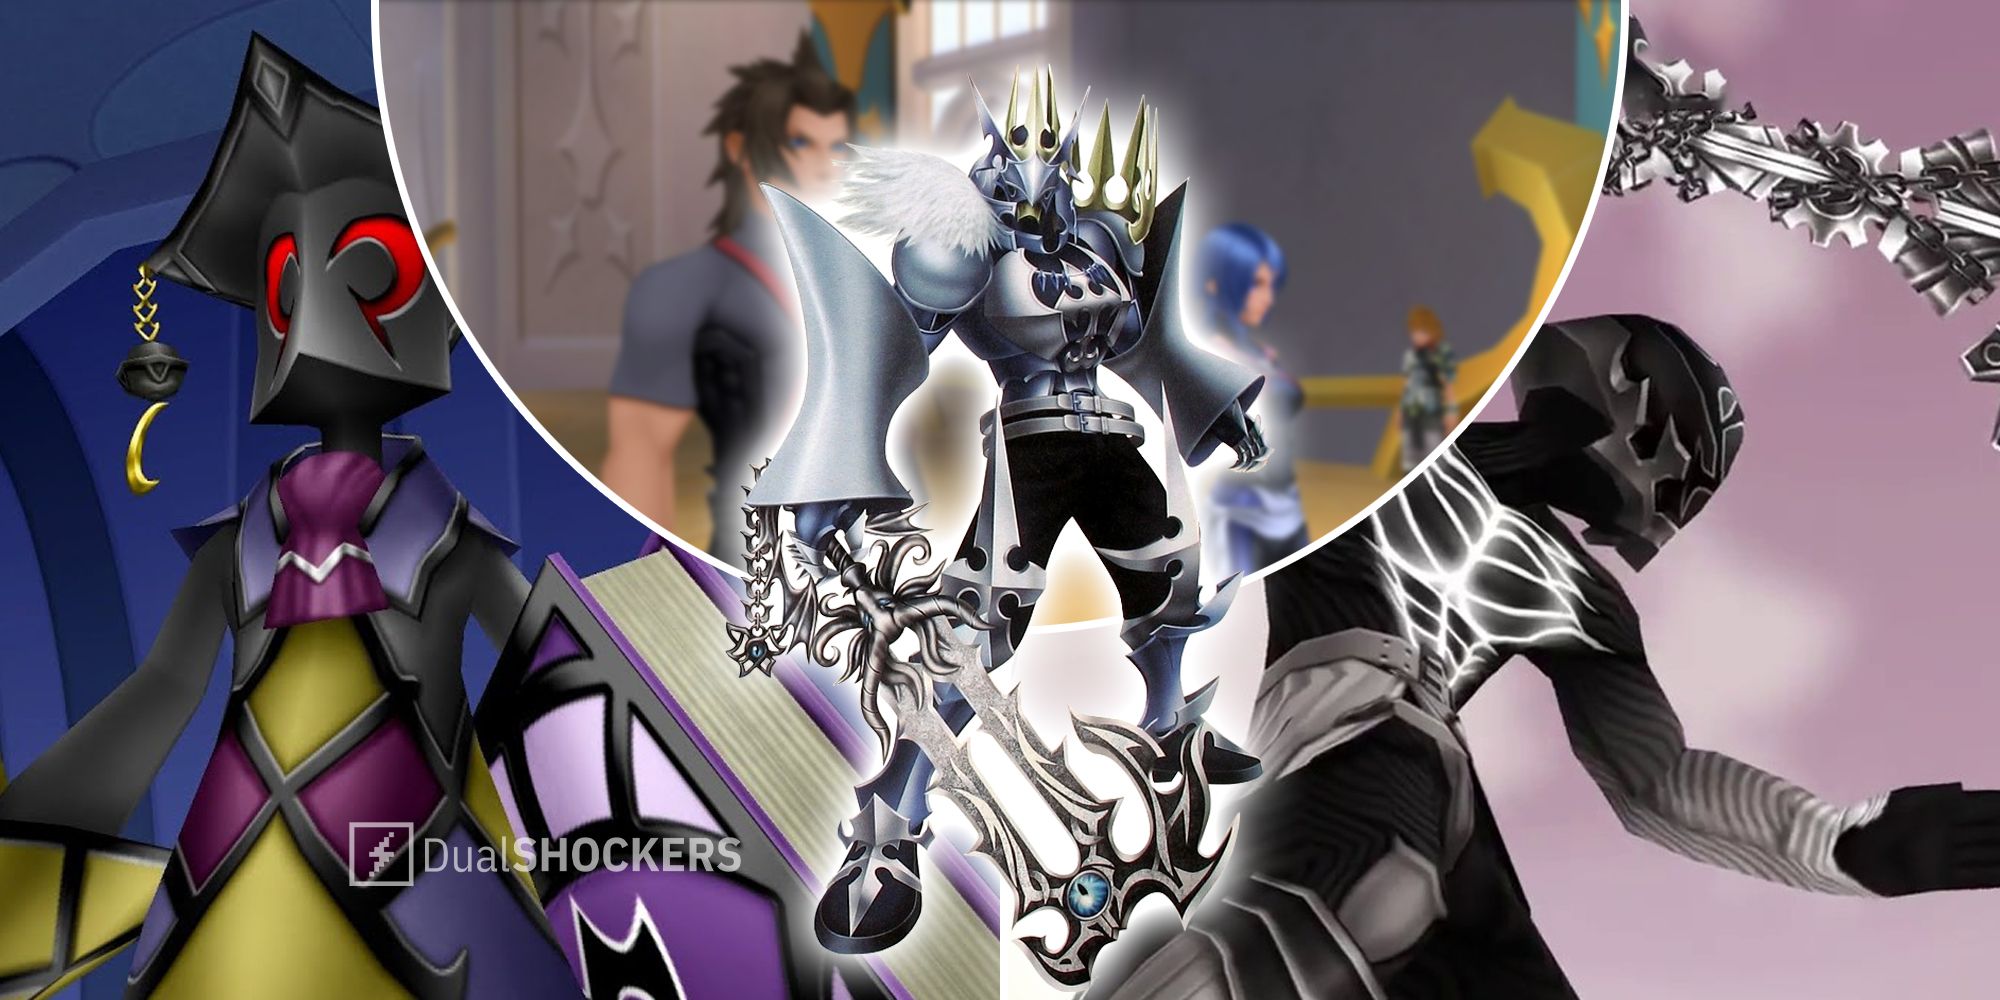 Kingdom Hearts Birth By Sleep Mimic Master on left, No Heart in middle, Vanitas Remnant on right